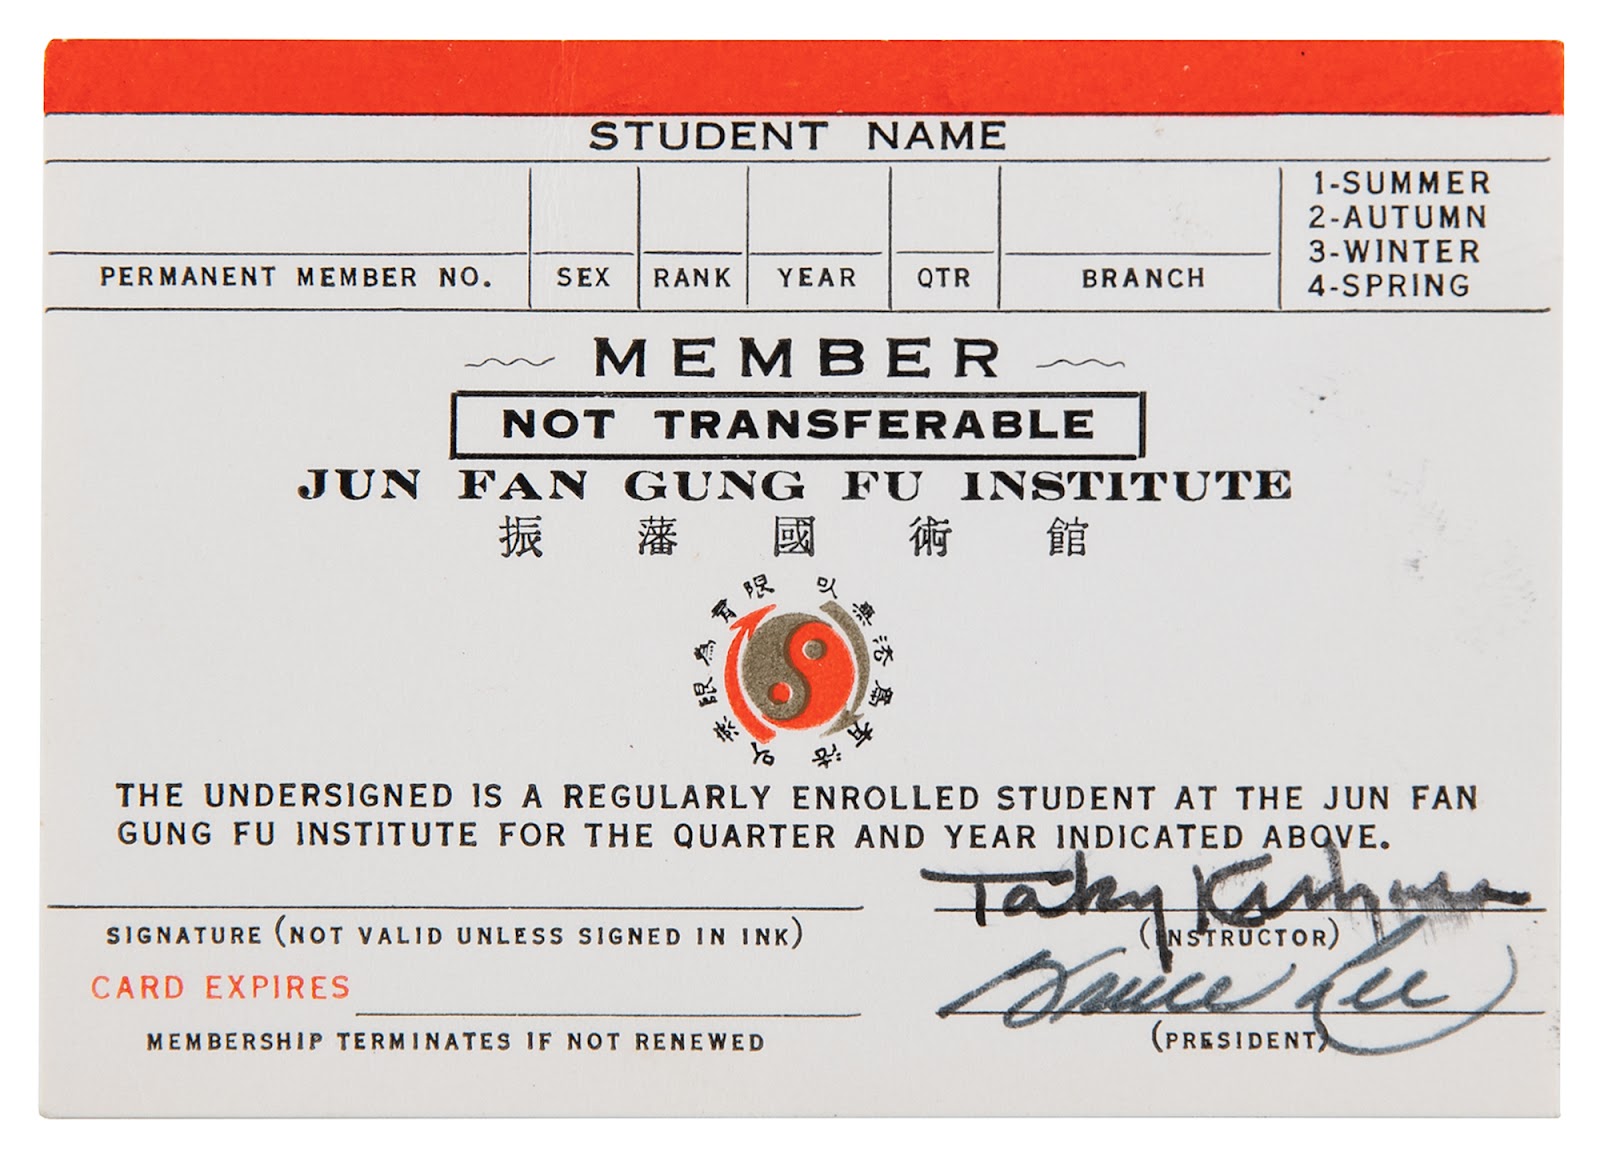 Unissued ‘red stripe’ card for Lee’s Jun Fan Gung Fu Institute featuring the Jeet Kun Do symbol in the center with his motto, 'Using no way as way, having no limitation as limitation.'